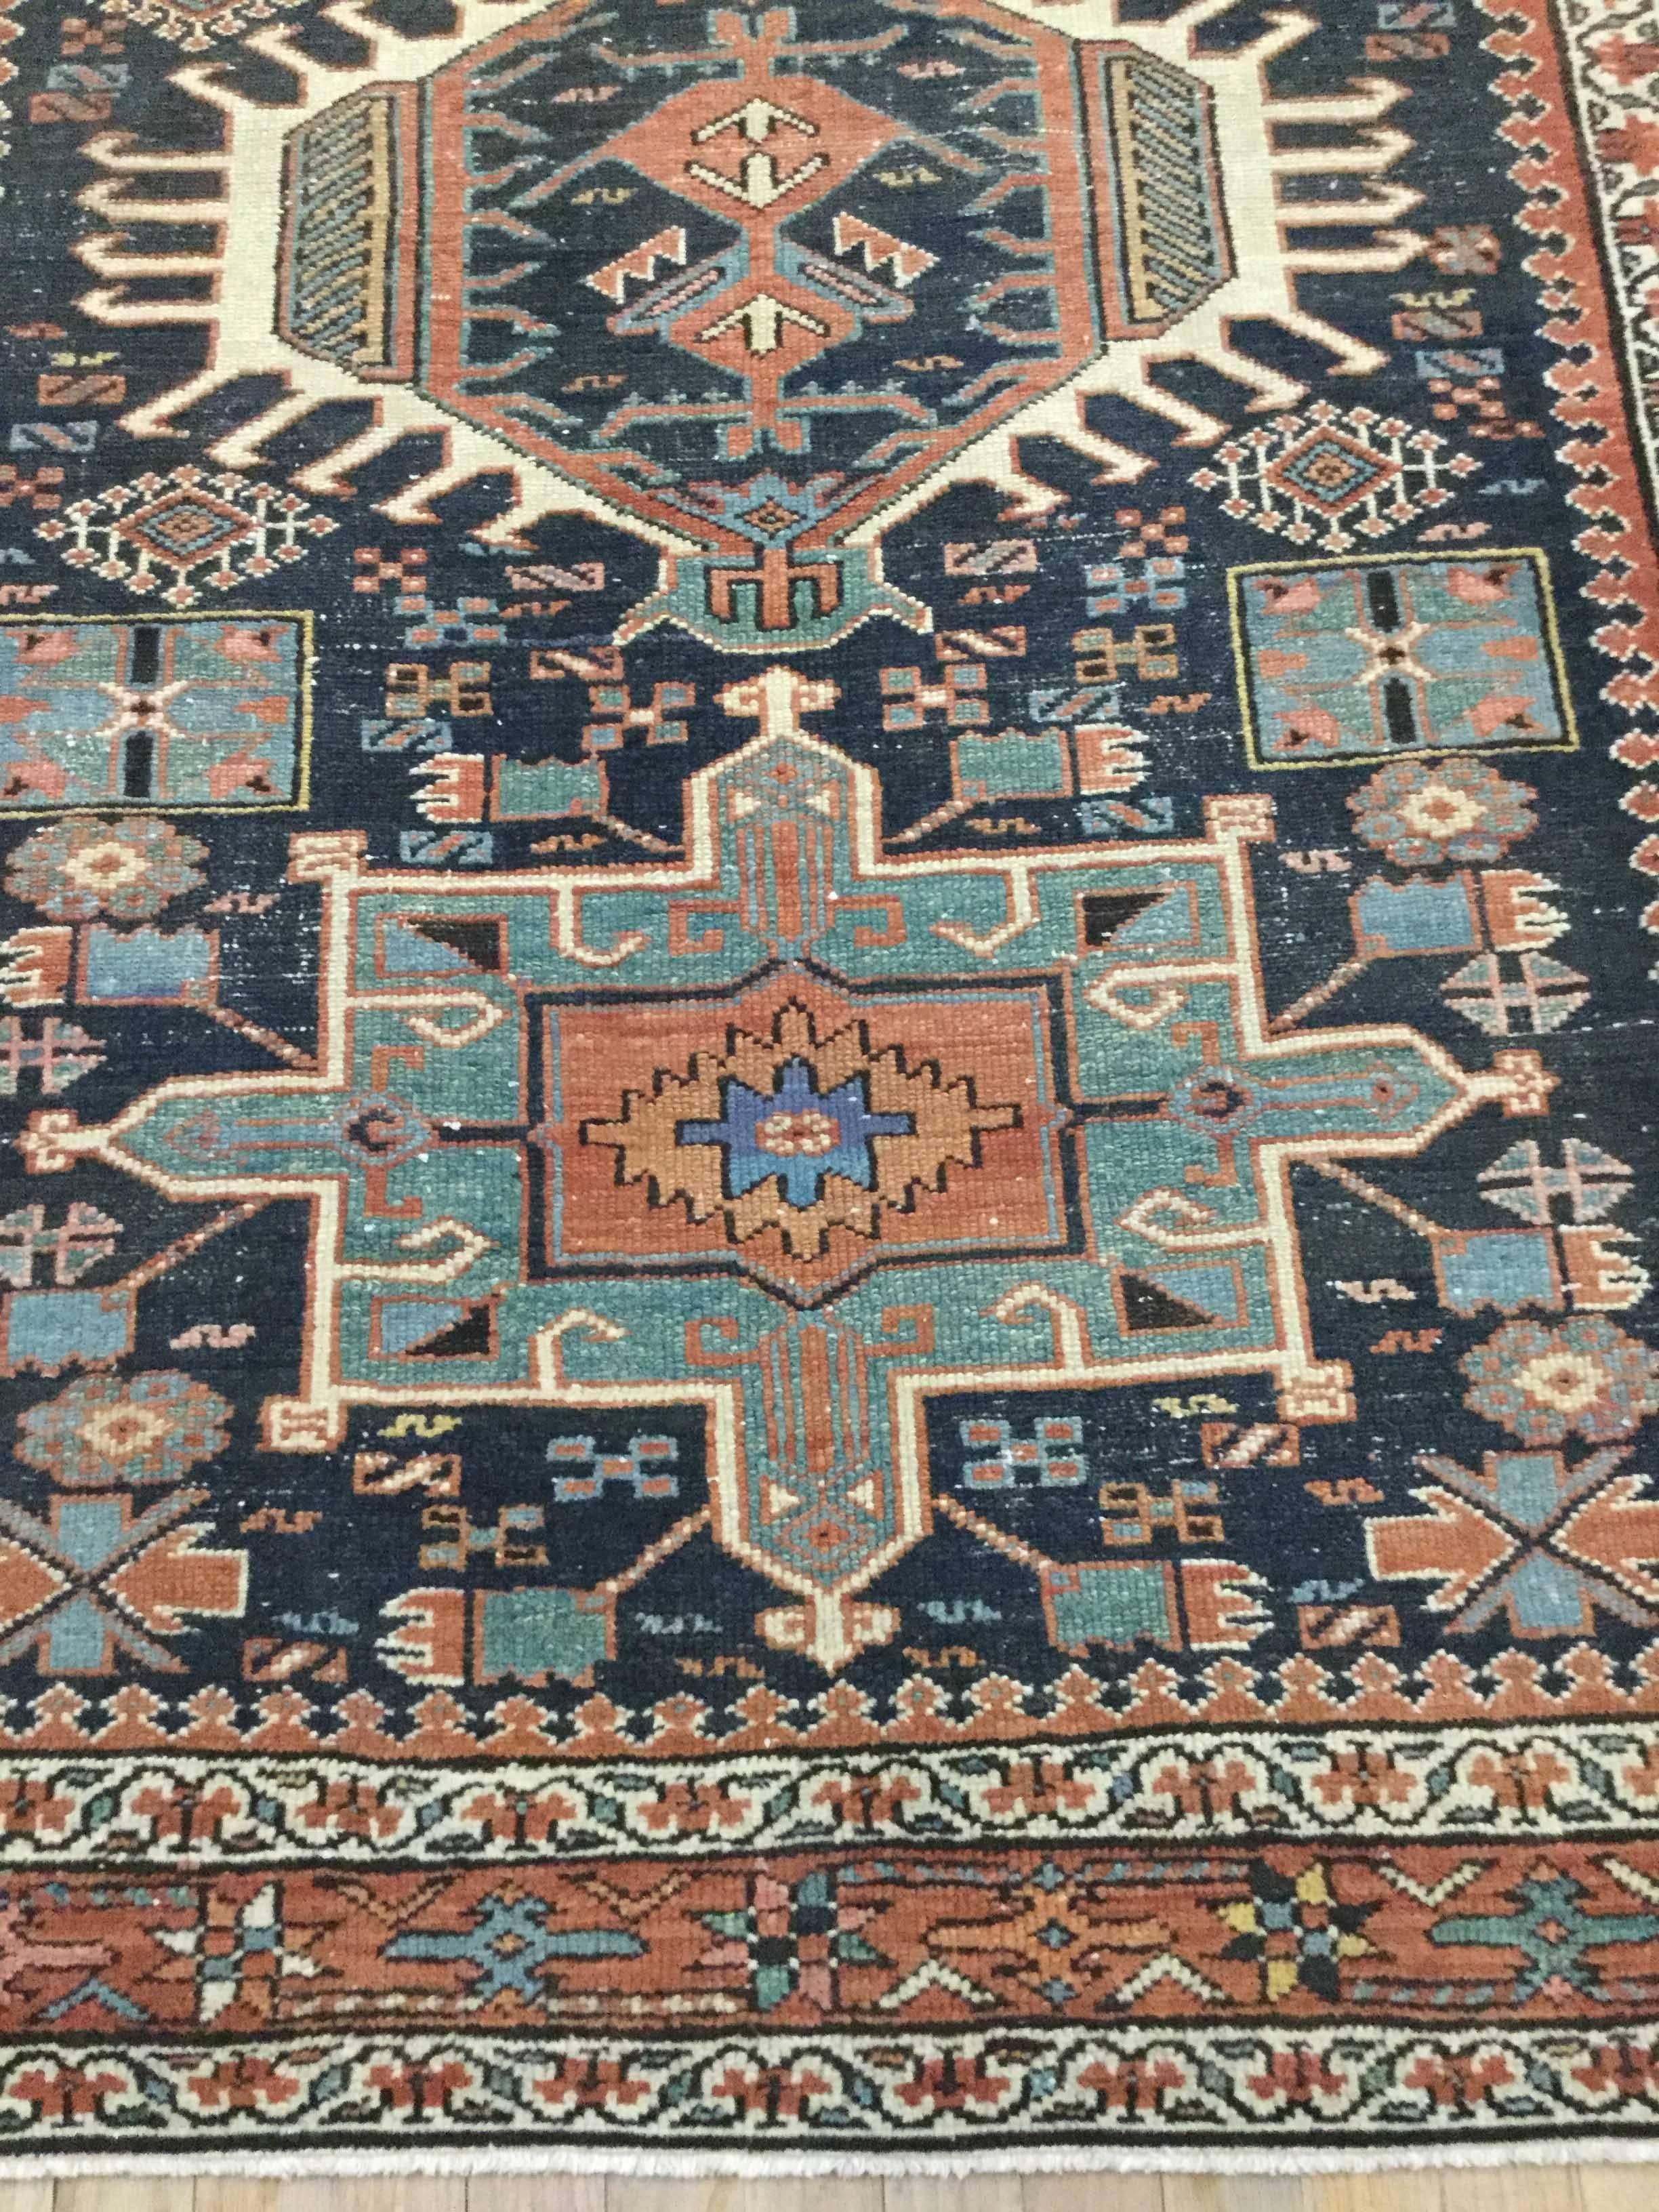 Early 20th Century Karaja Rug, First Quarter of the 20th Century